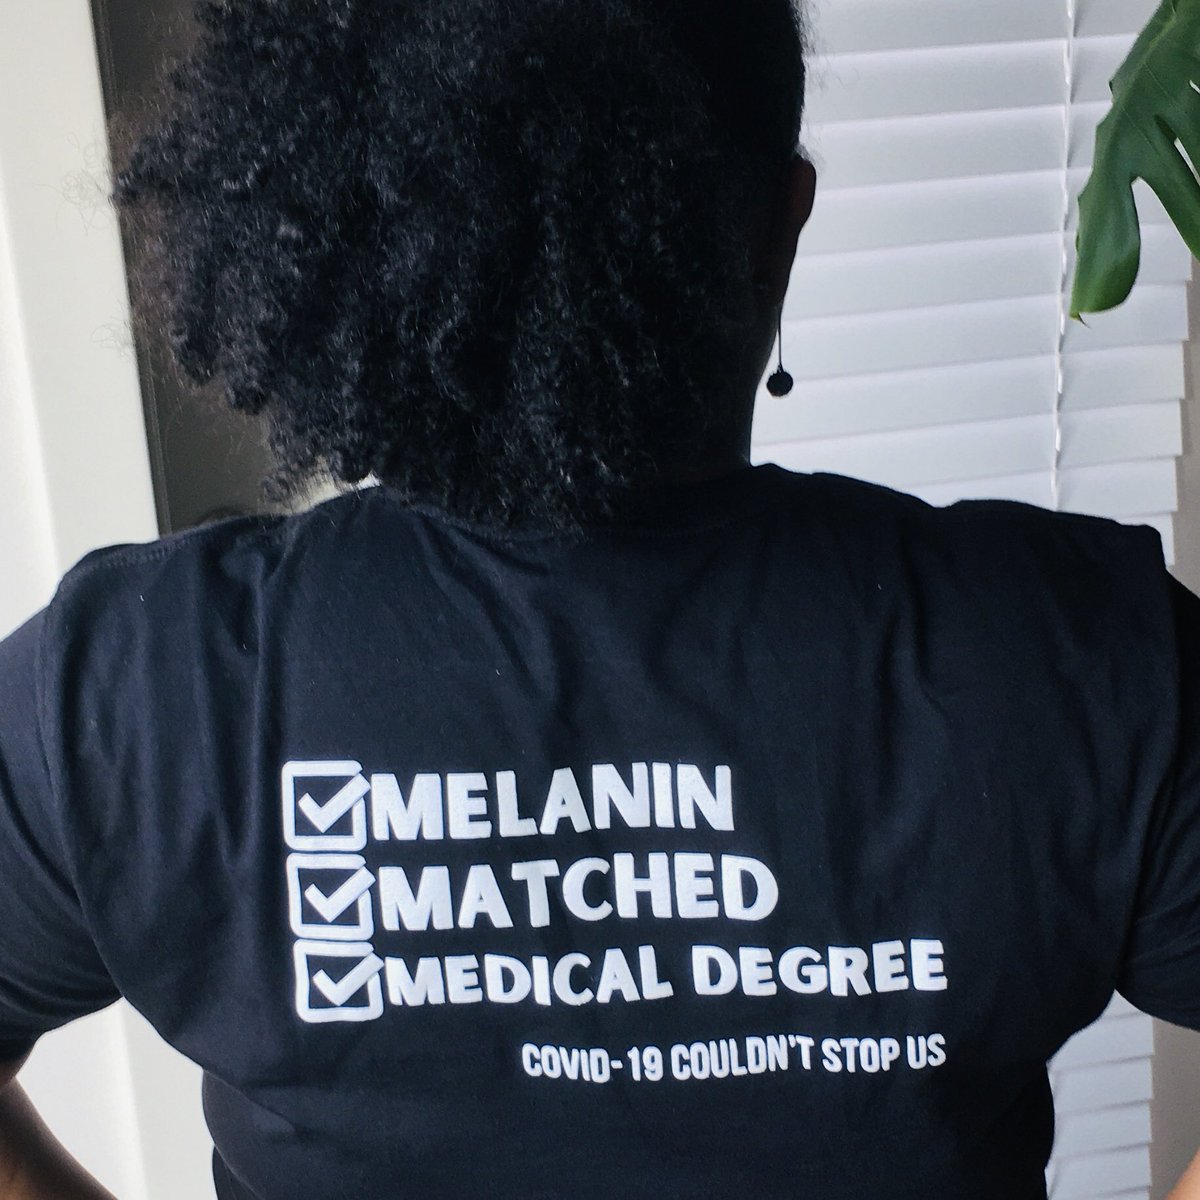 So, why Family Medicine? 👩🏾‍⚕️
Family Medicine allows me to enact my concern for the entire community’s wholeness, from pediatrics to geriatric care to reproductive health and everything in between.  (1/4)
#FMRevolution #BlackFamMedMatch #ABFMP